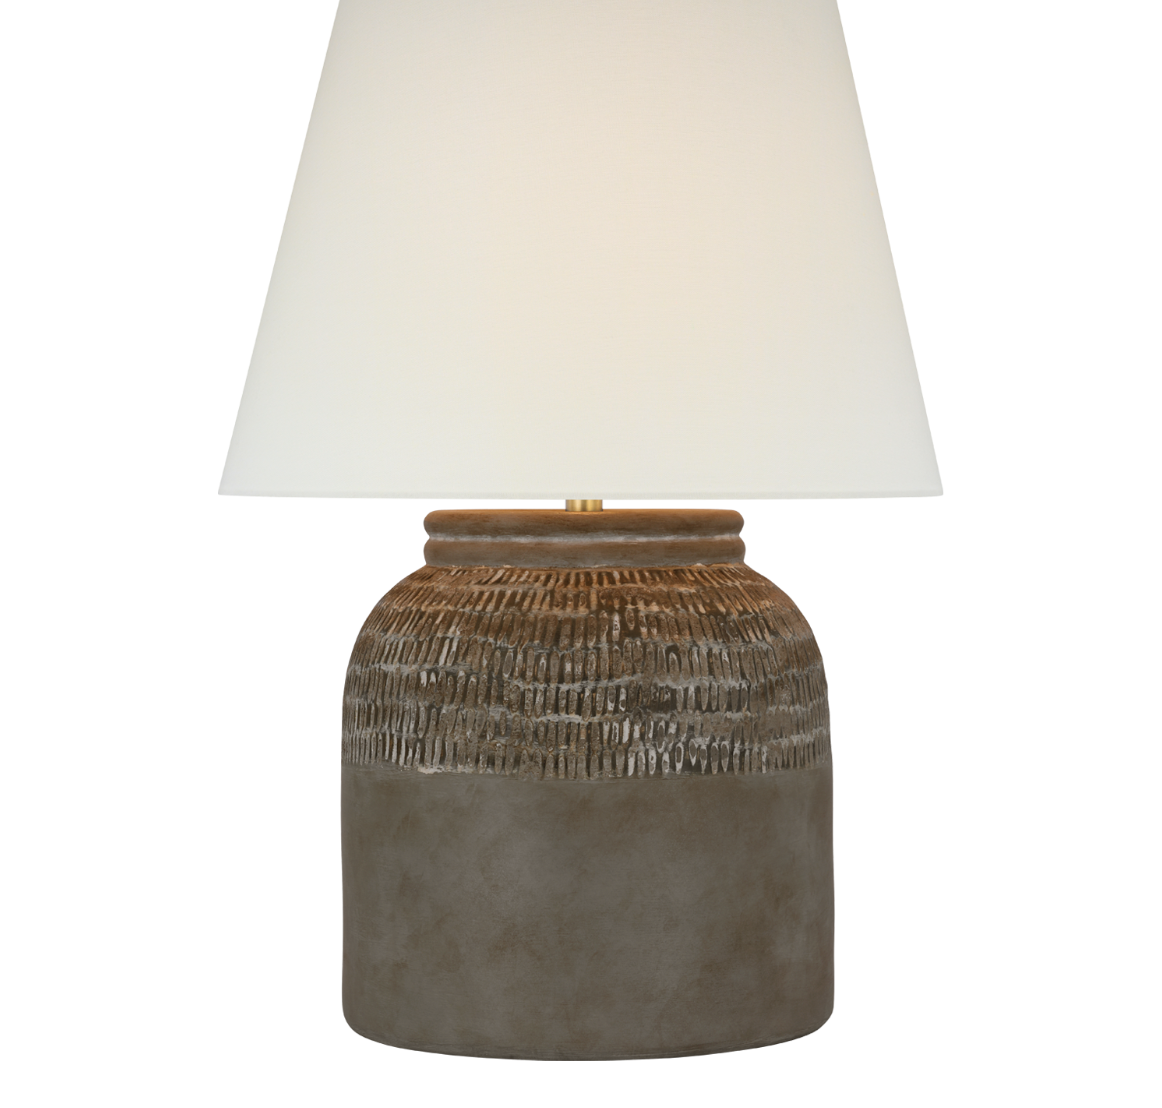 Indra Medium Table Lamp: Standing at 27" tall with a 19" width and featuring a 12" round base. Equipped with an E26 dimmer socket and 15 LED A19 wattage.